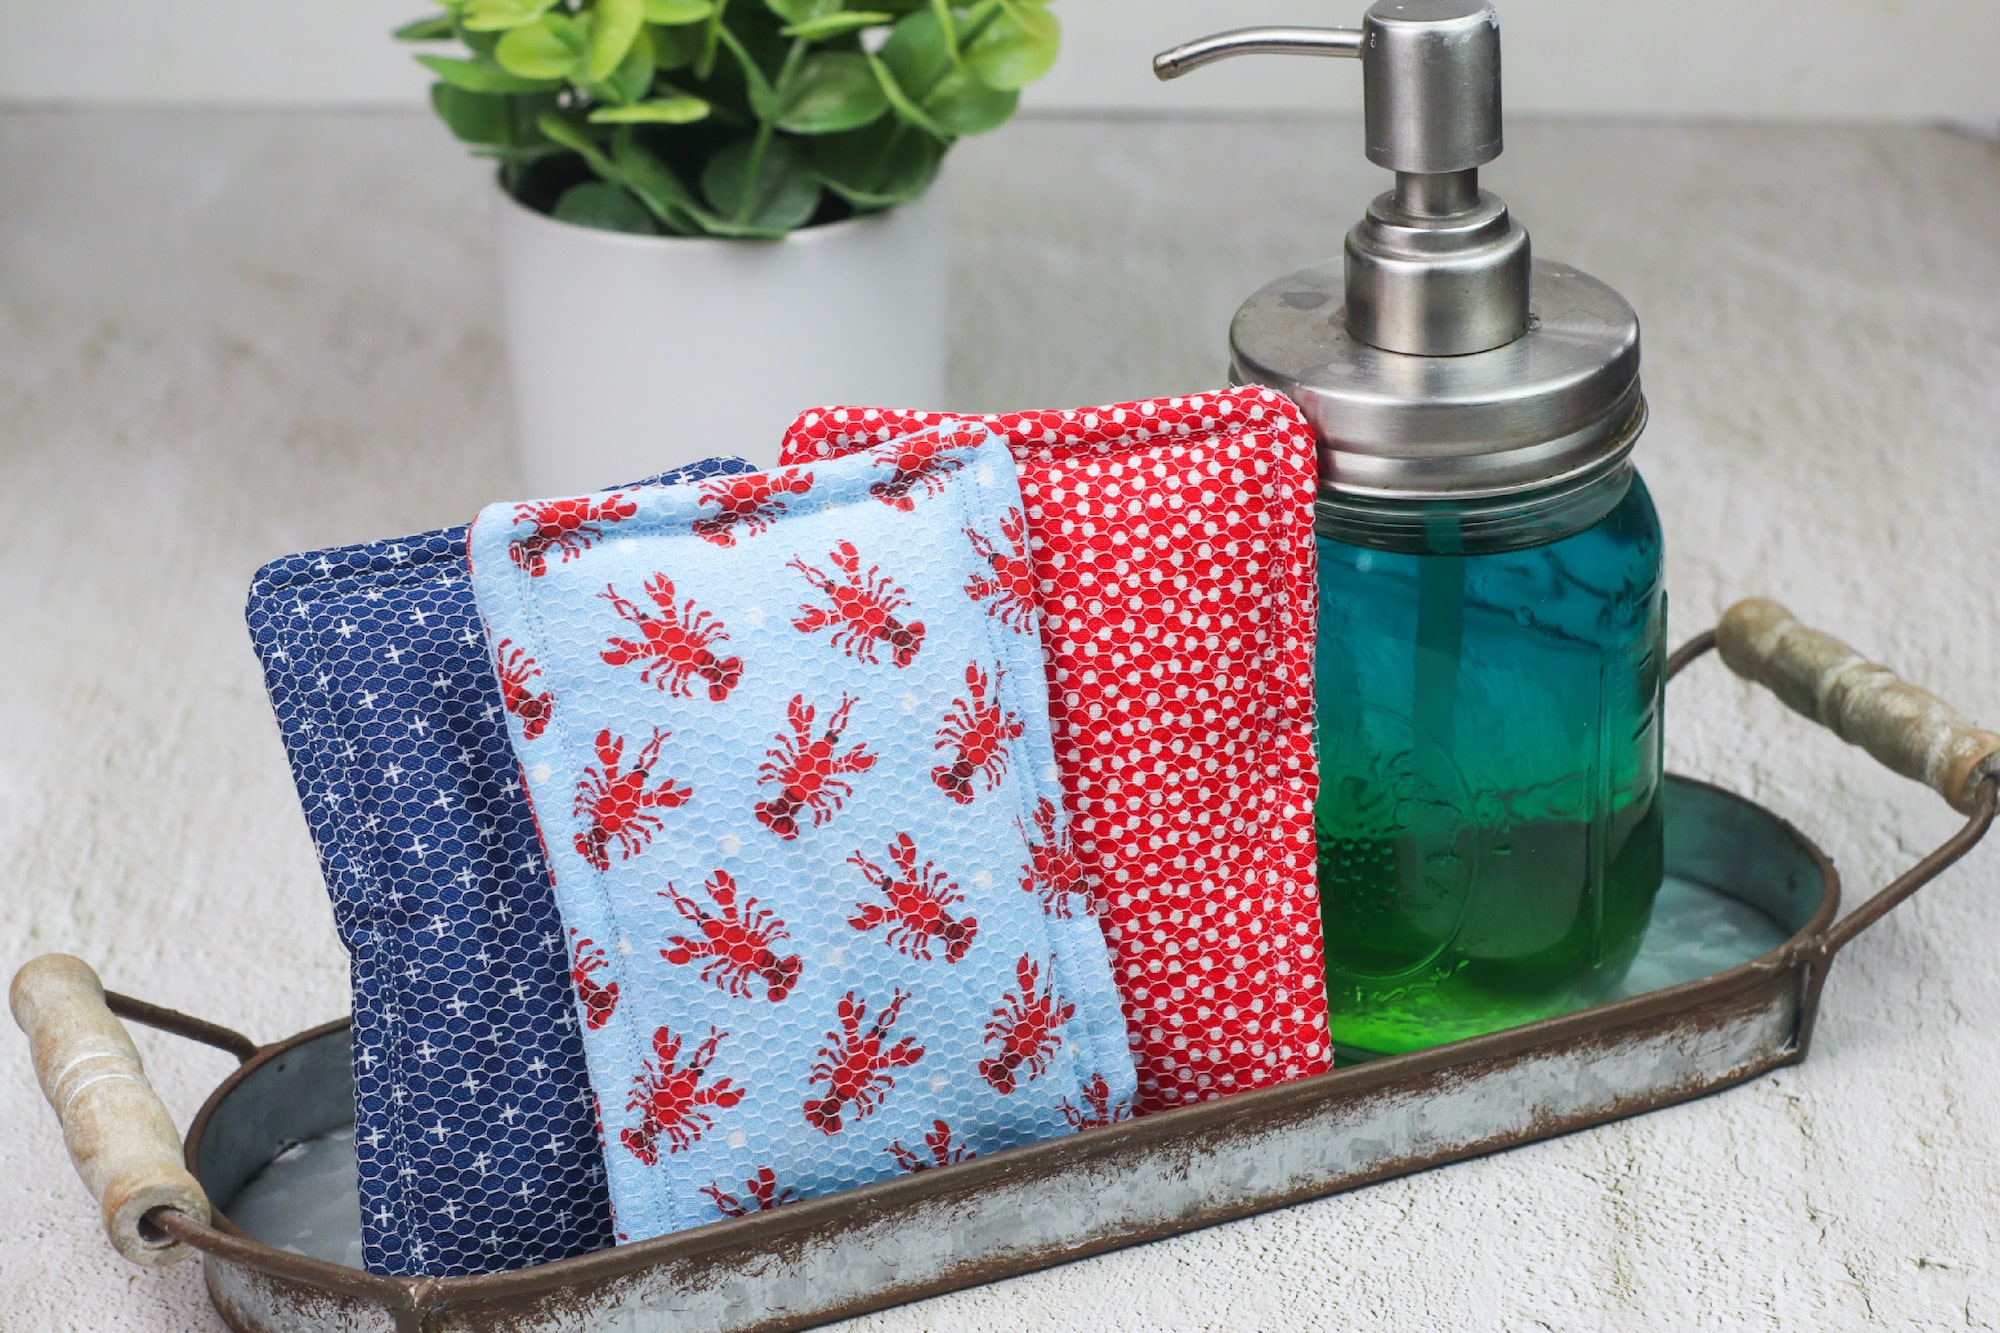 A metal tray holds a teal soap dispenser, a reusable sponge, and three folded towels with floral and polka dot patterns, set on a light surface.